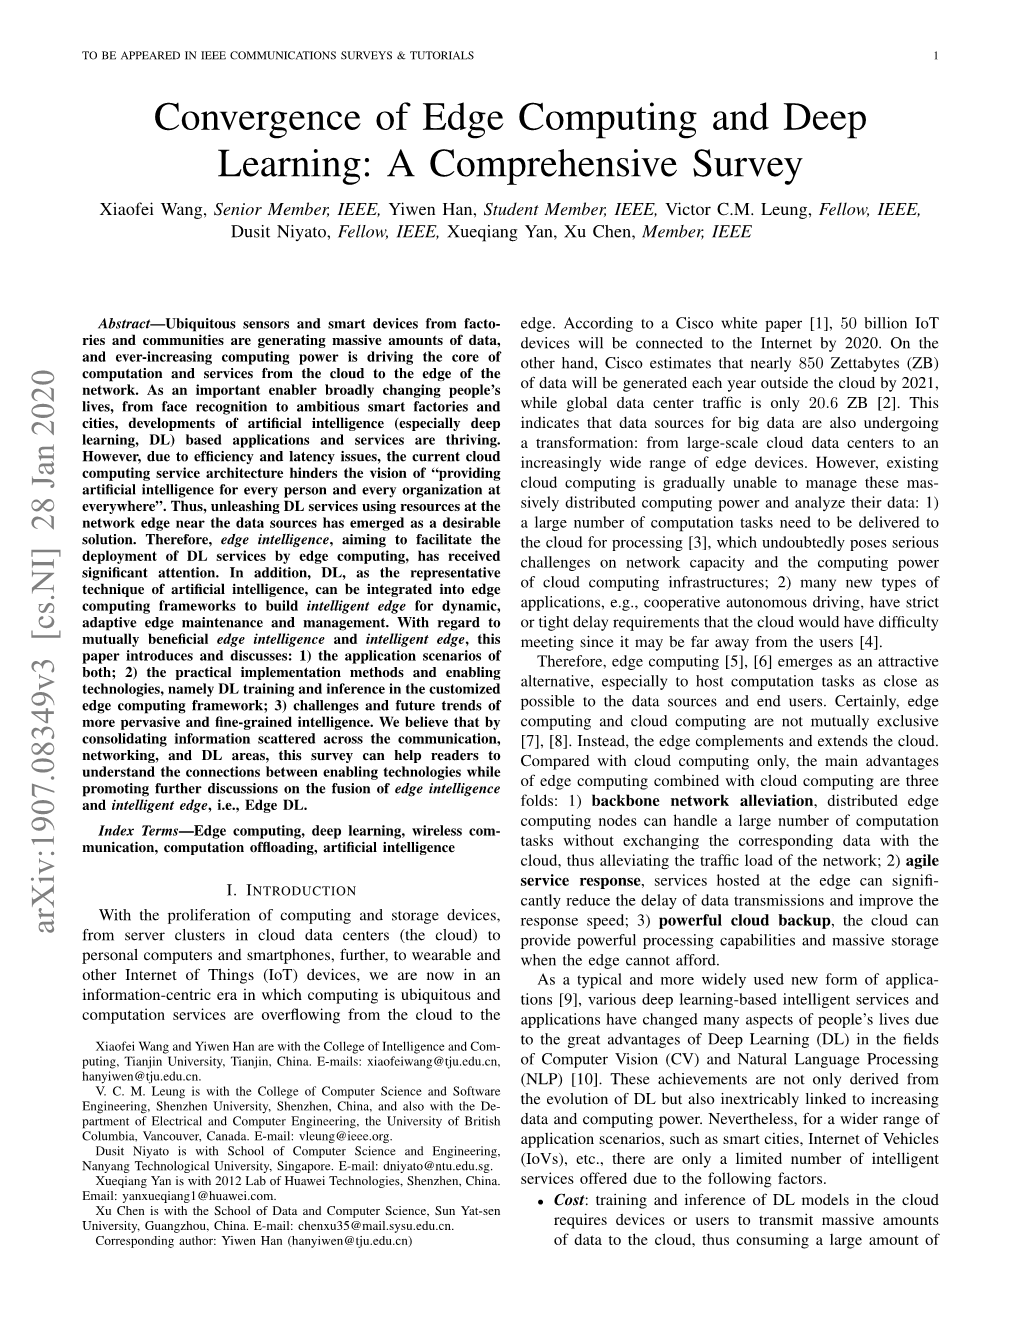 Convergence of Edge Computing and Deep Learning: a Comprehensive Survey Xiaofei Wang, Senior Member, IEEE, Yiwen Han, Student Member, IEEE, Victor C.M